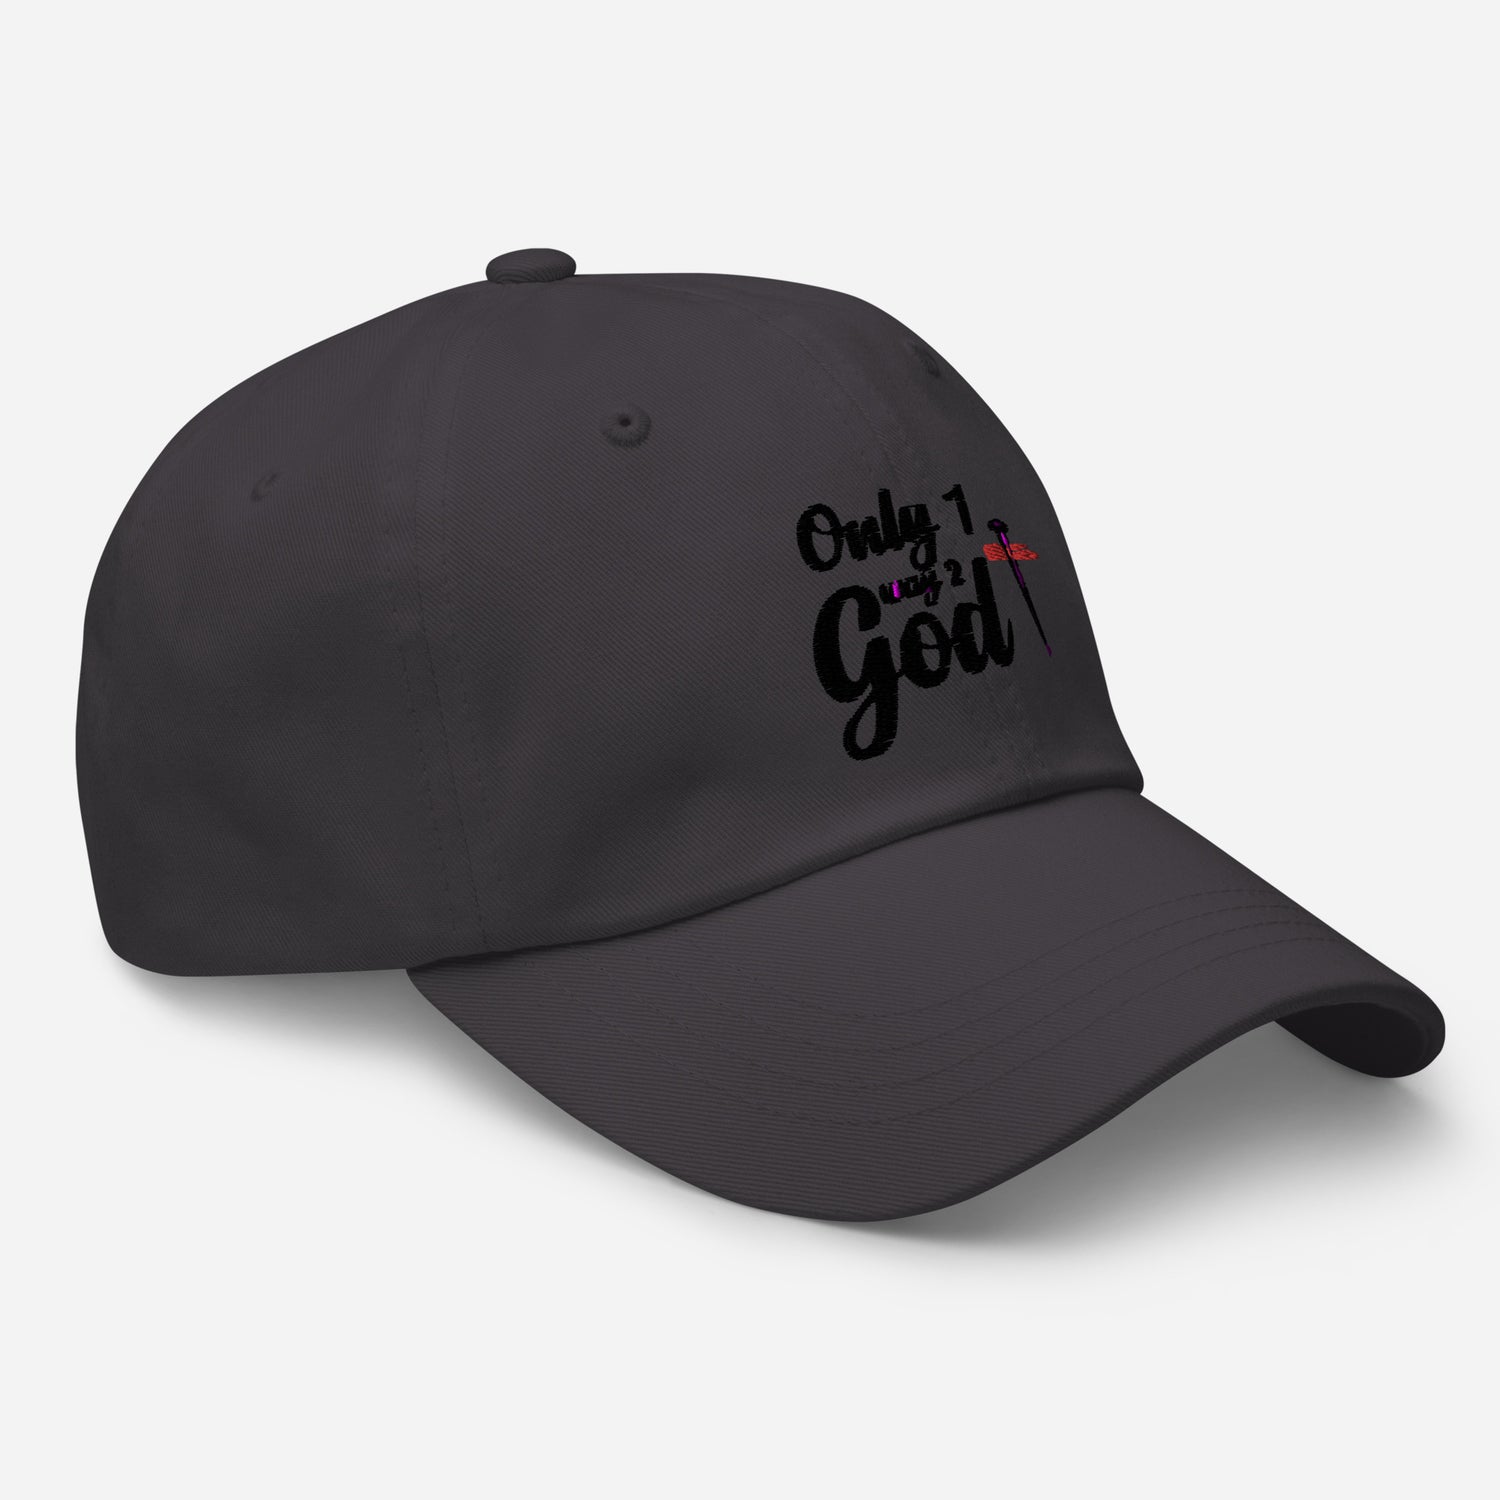 Only 1 WAY 2 GOD HAT